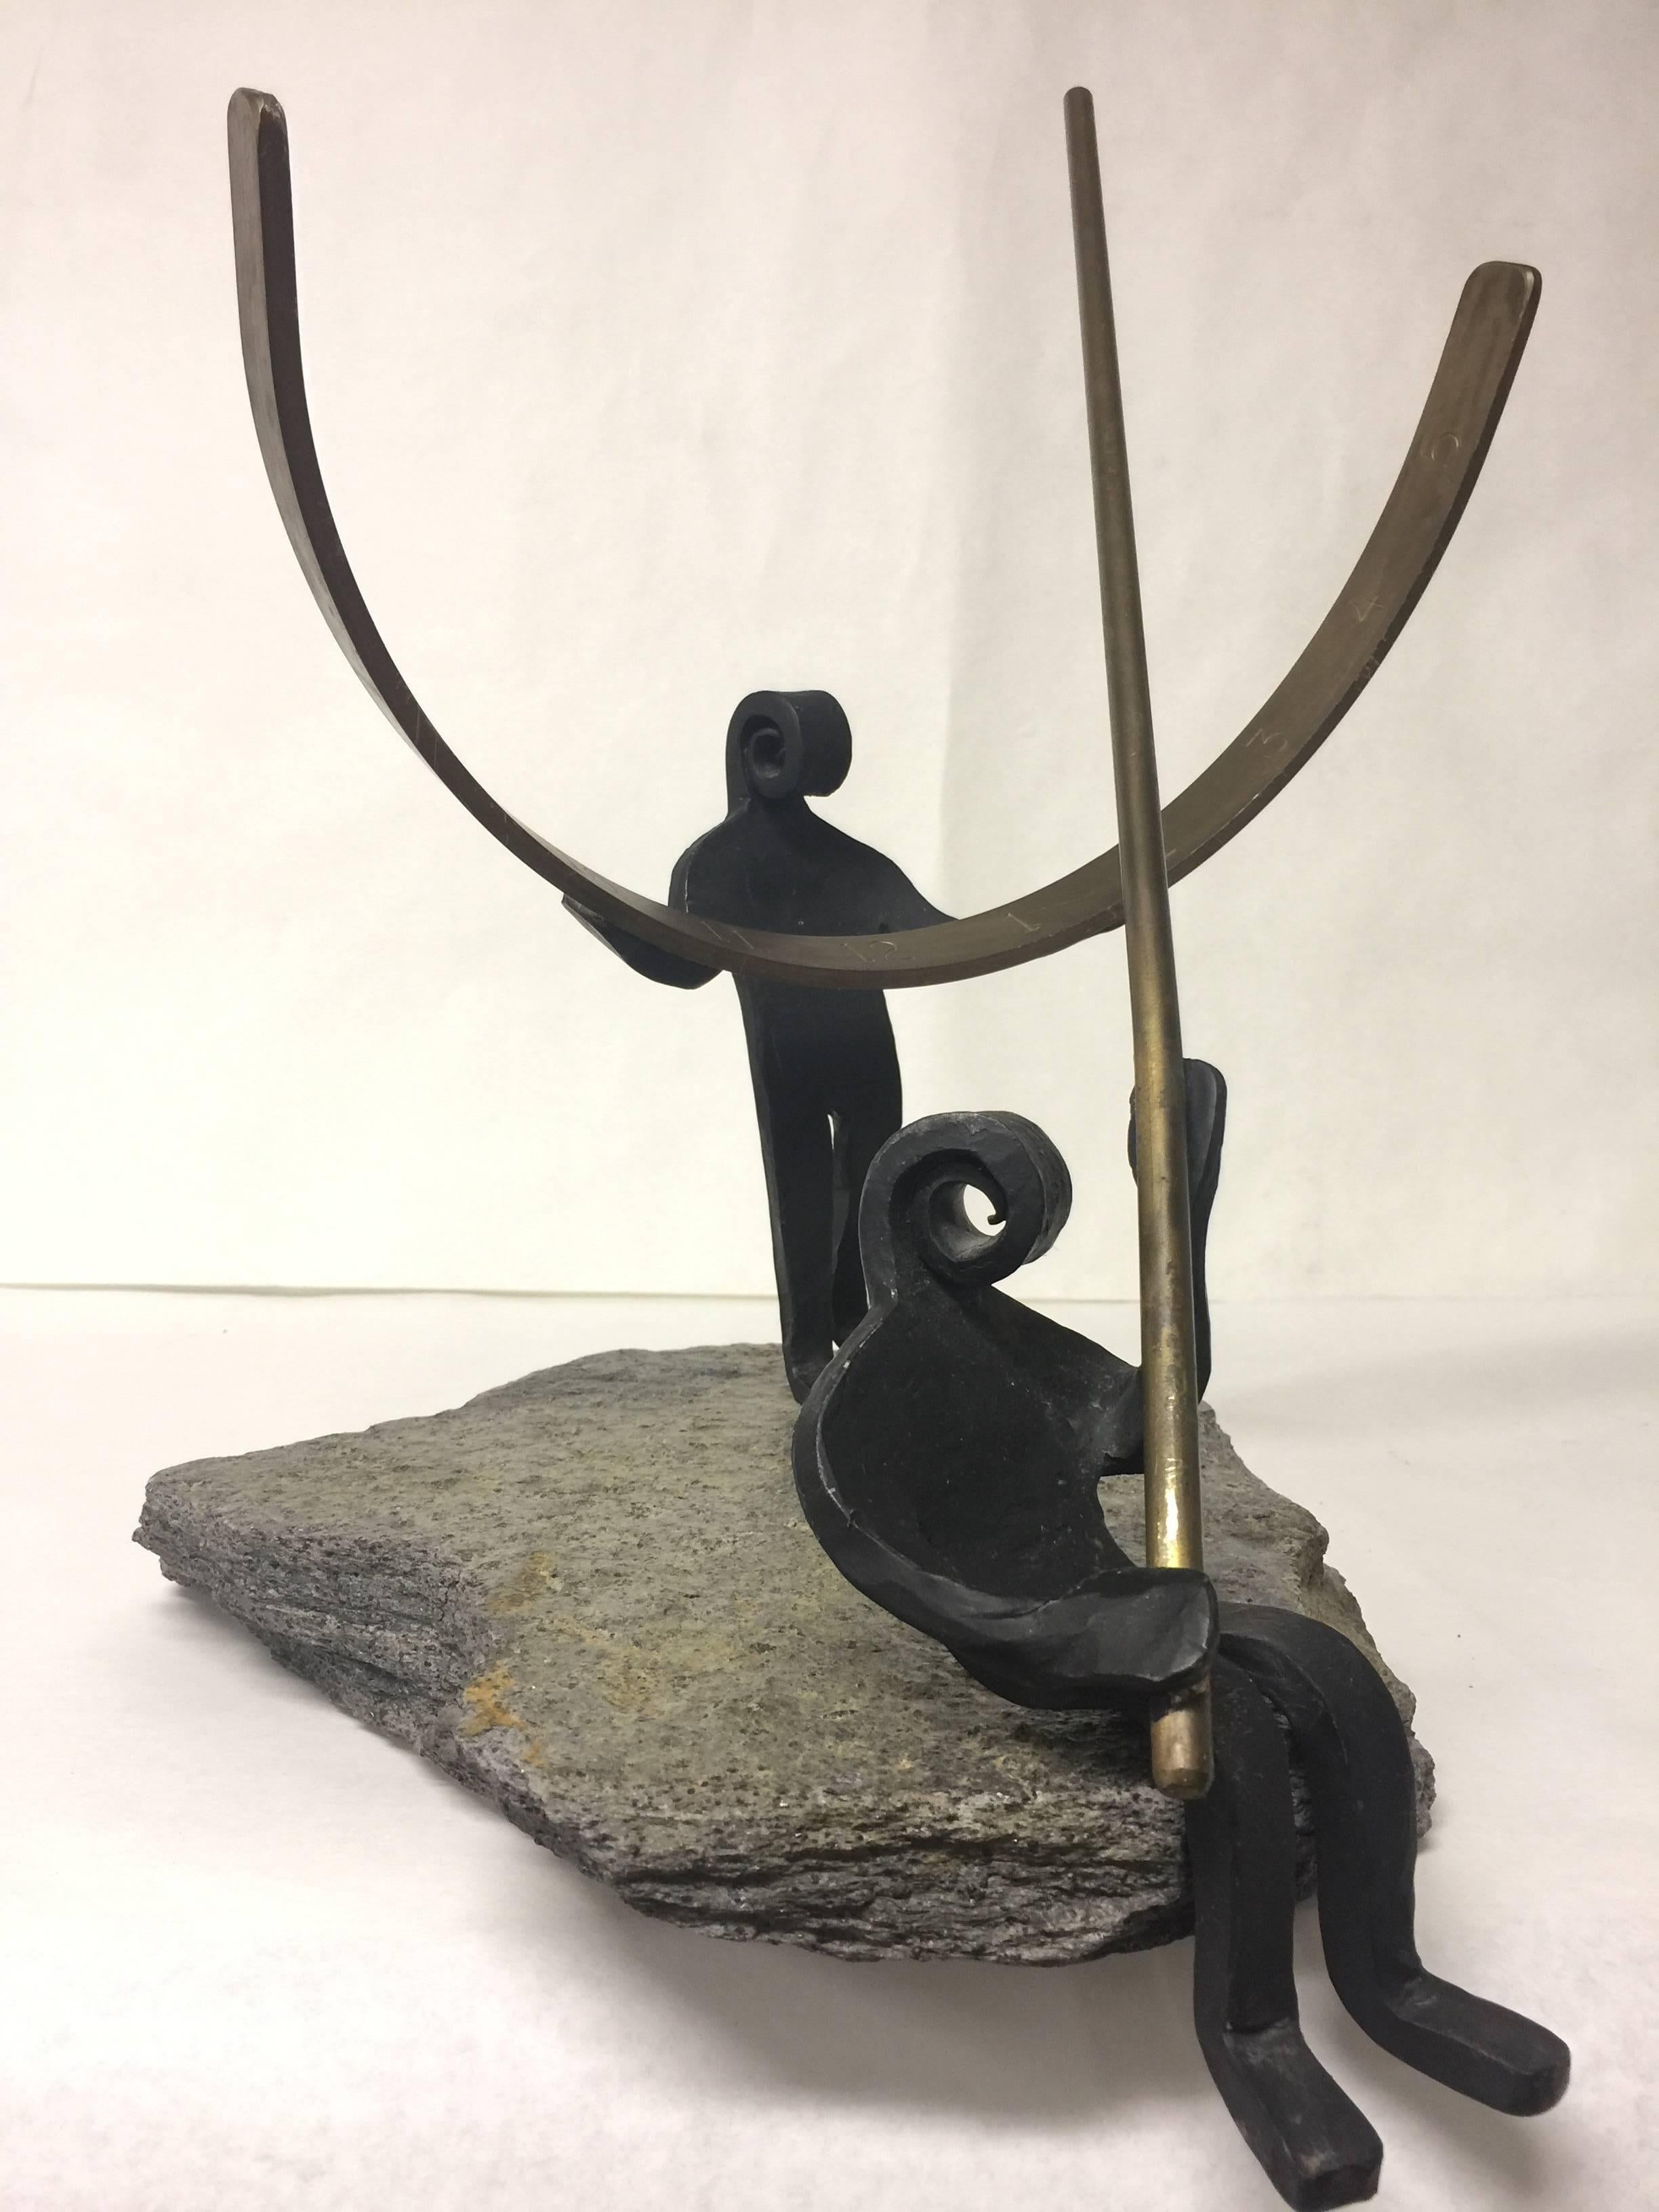 This sundial shows two abstract wrought iron figures, one seated holding the gnomon (the long solid brass rod) and the other standing holding the dial (the curved and incised brass semicircle) both on top of a flat granite like stone. Each figure